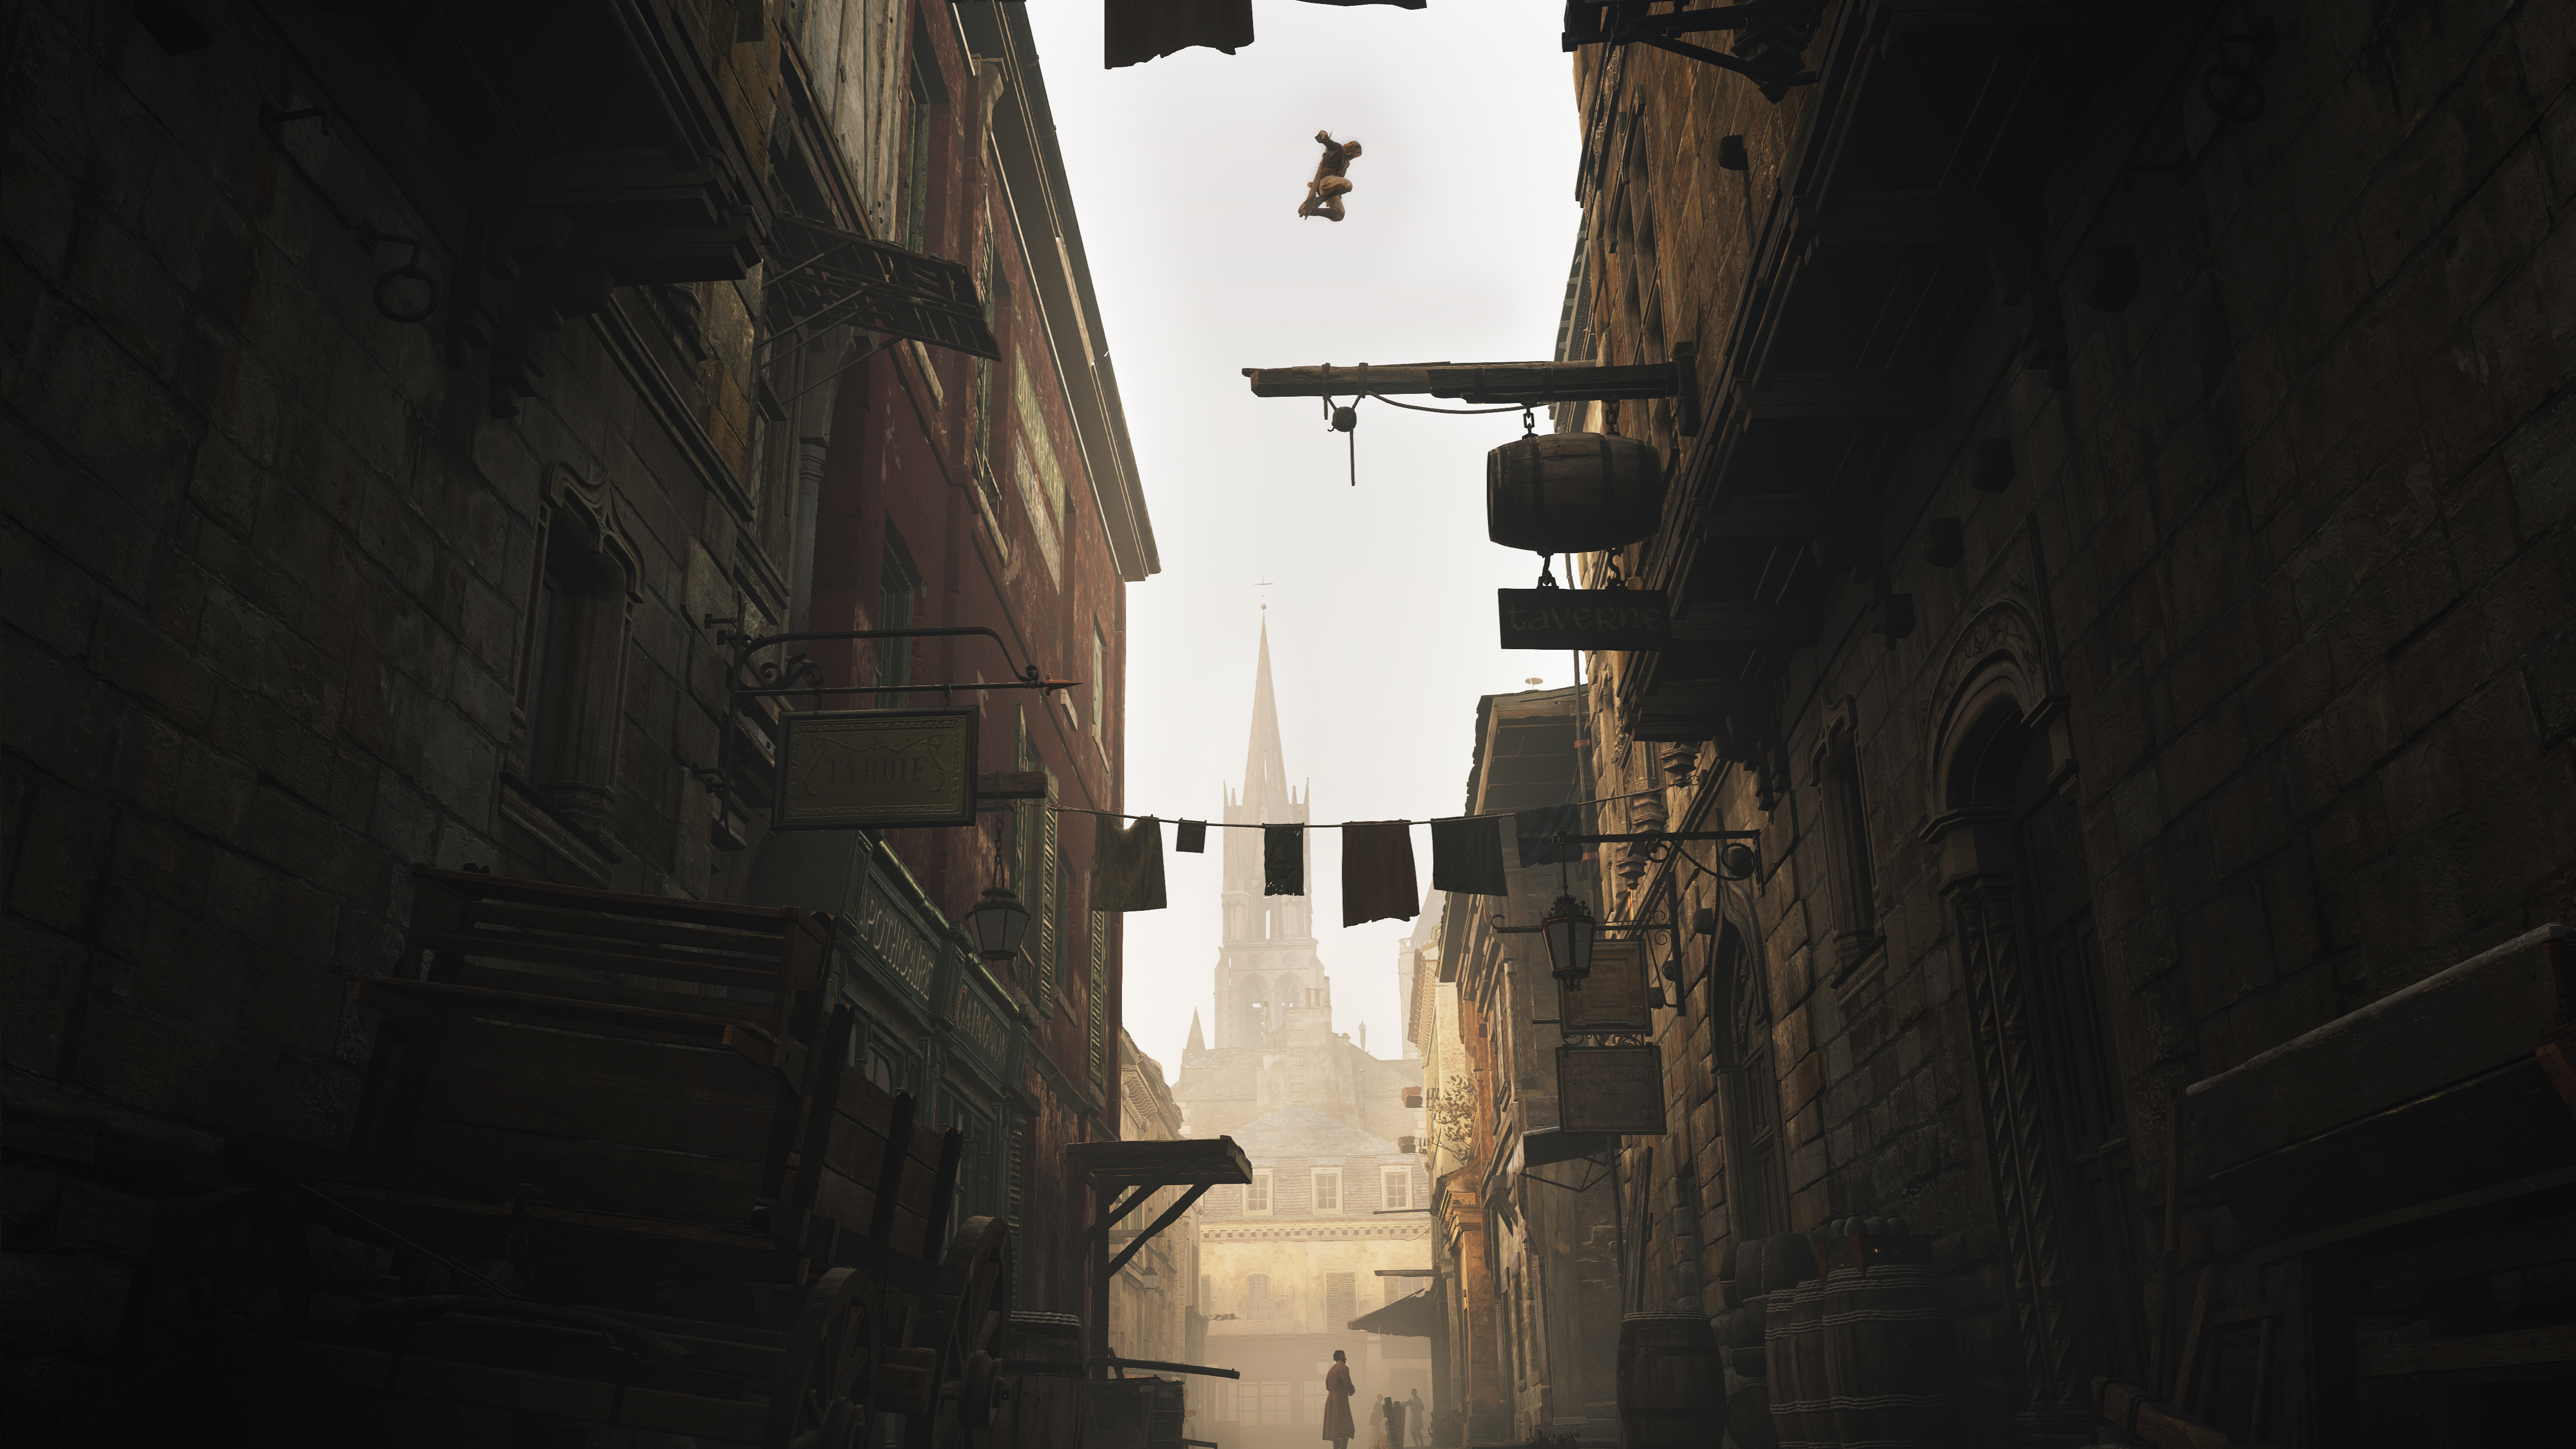 Video Game Assassins Creed Unity 4480x2520